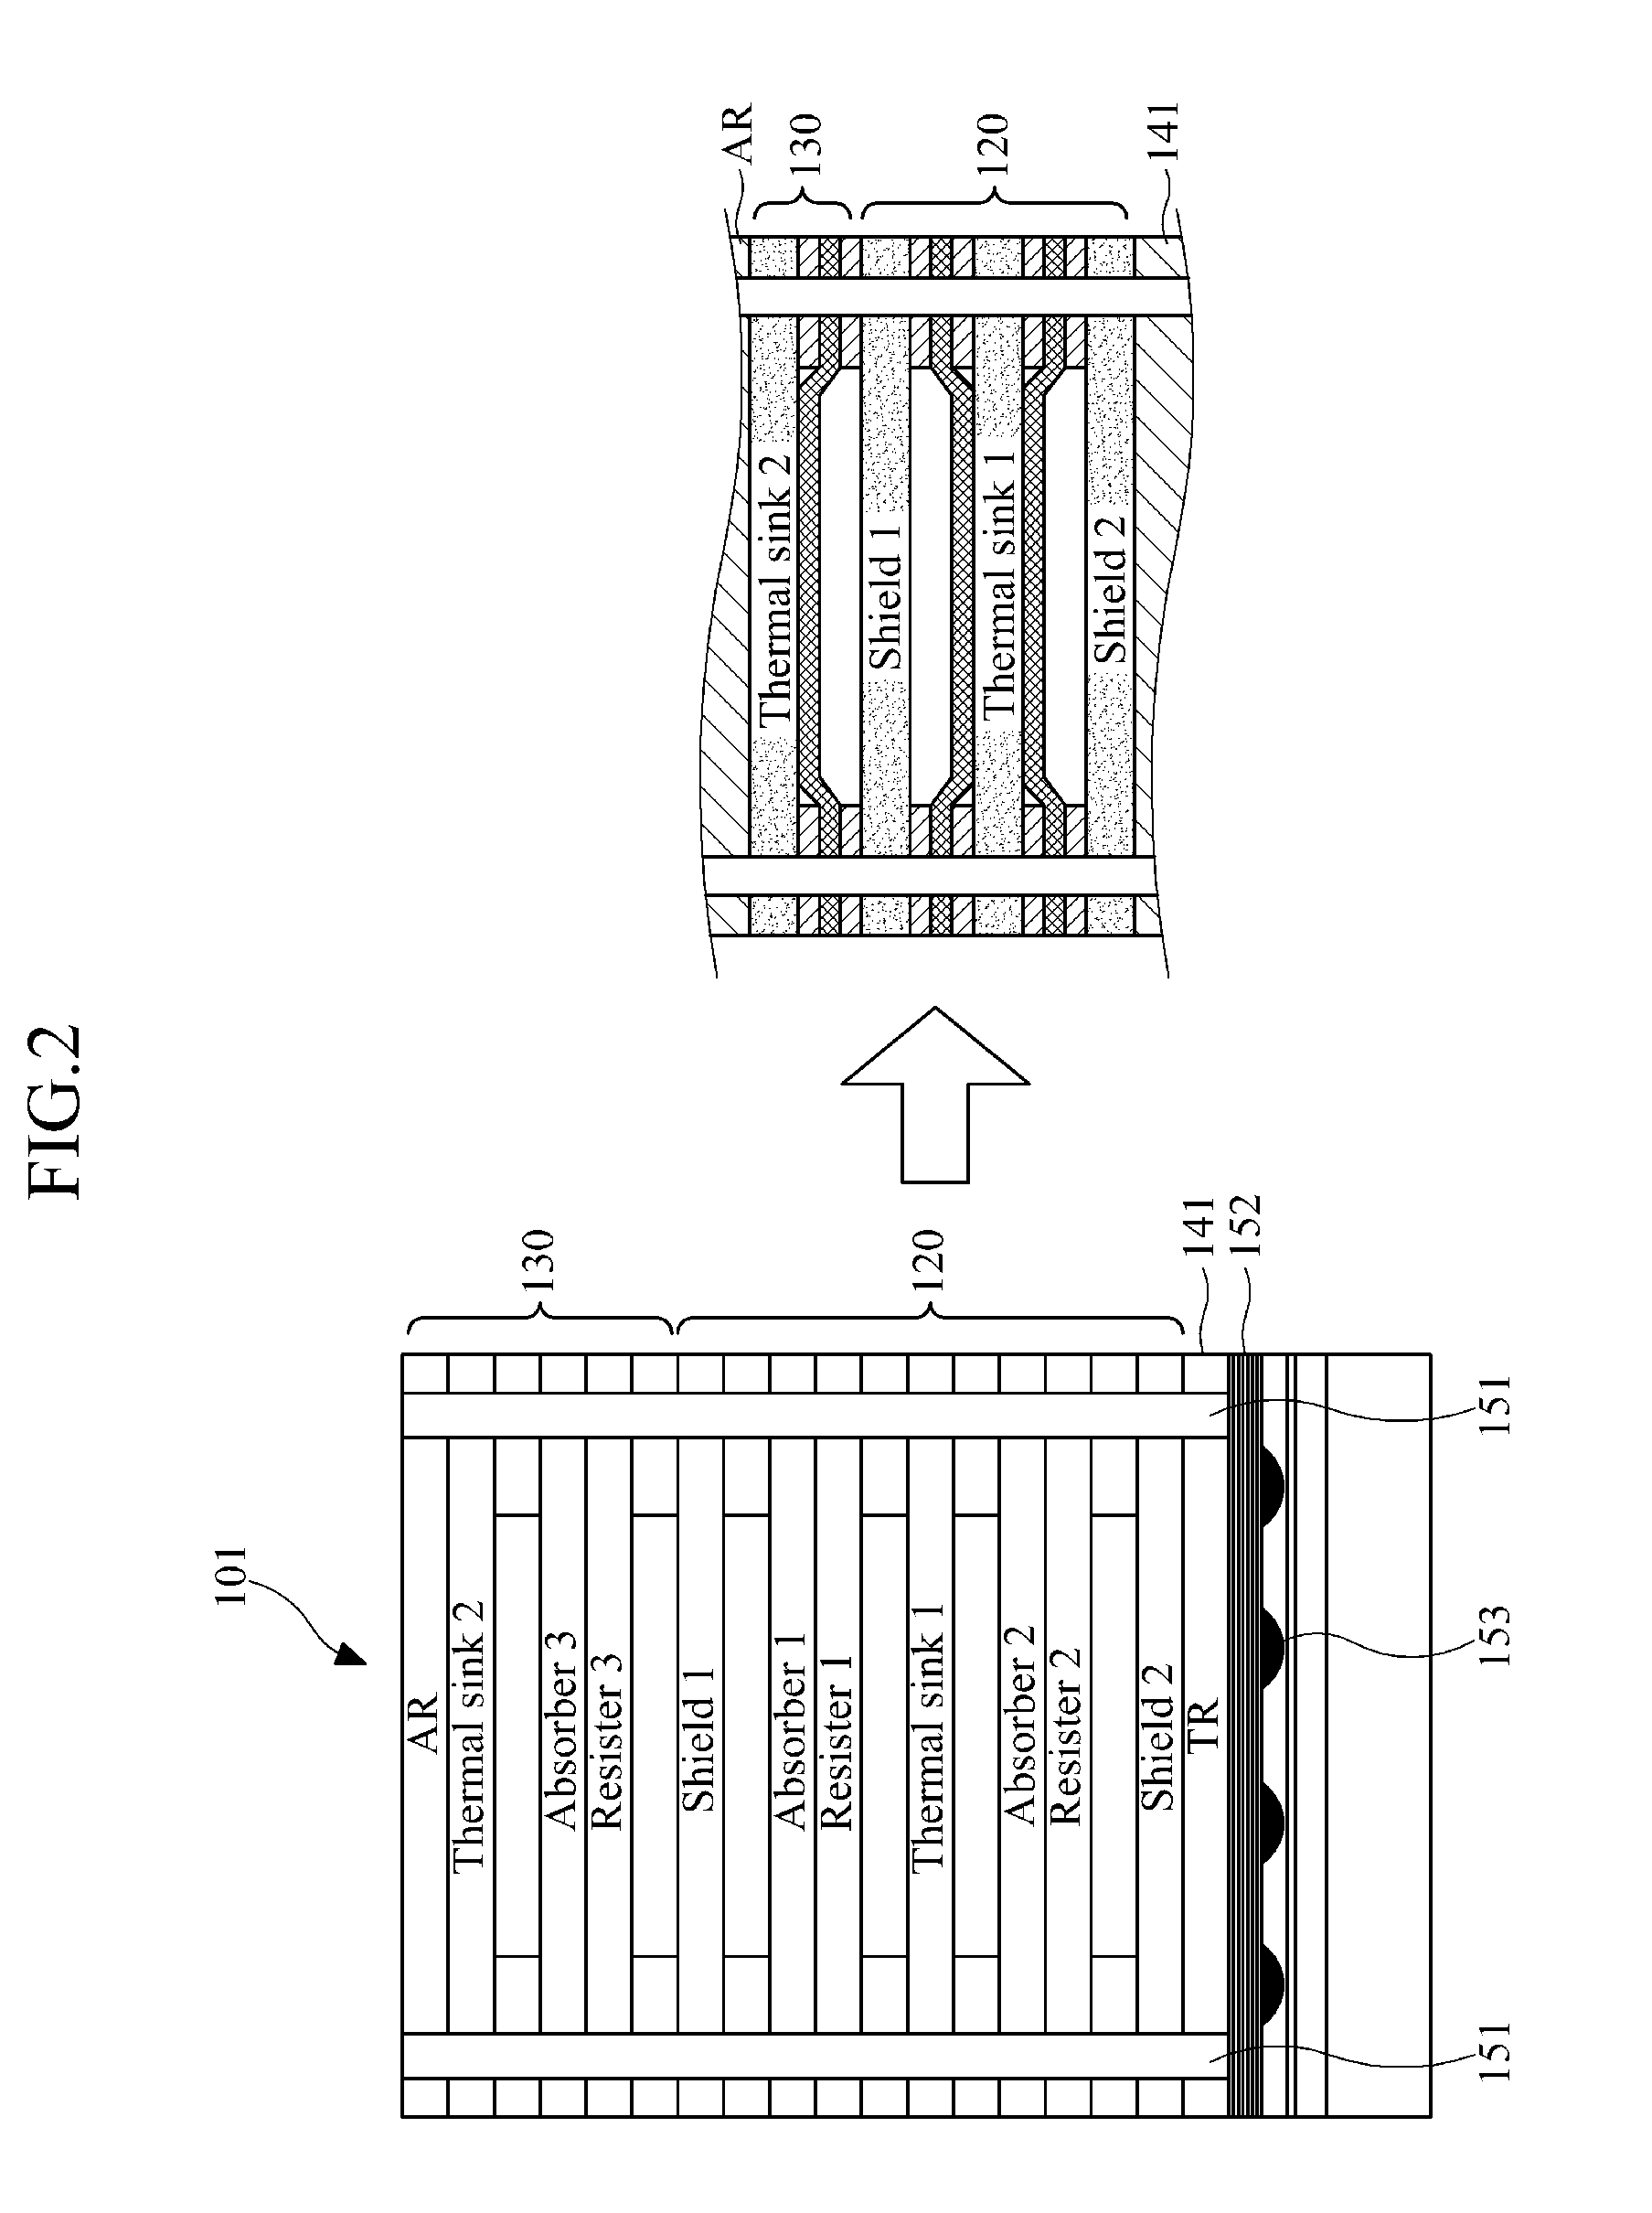 Image sensor for detecting wide spectrum and method of manufacturing the same